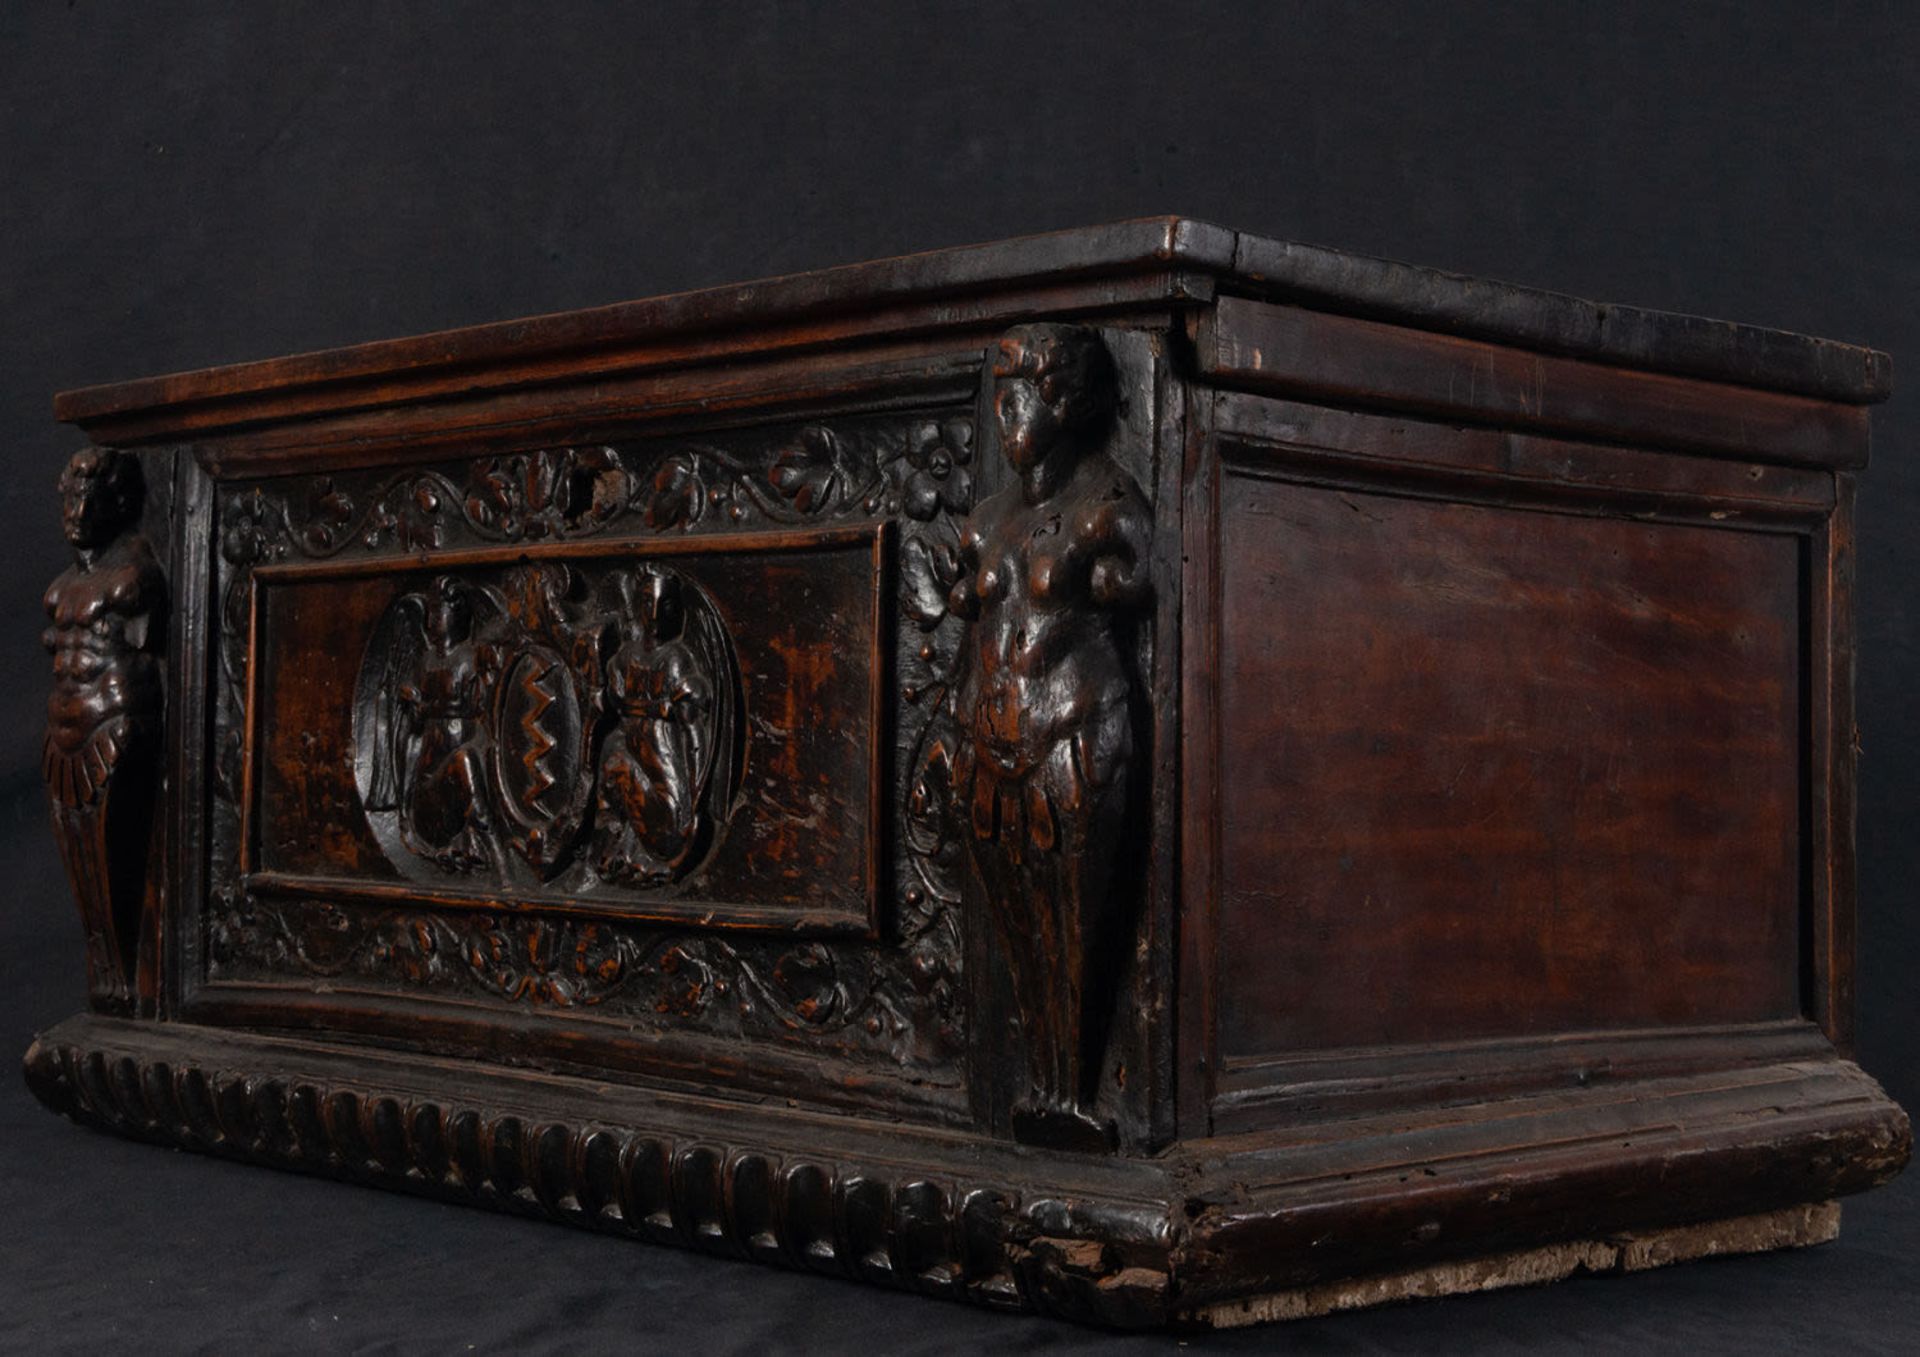 Large and Important Renaissance Chest, Spain or Italy, 16th century - Image 5 of 7